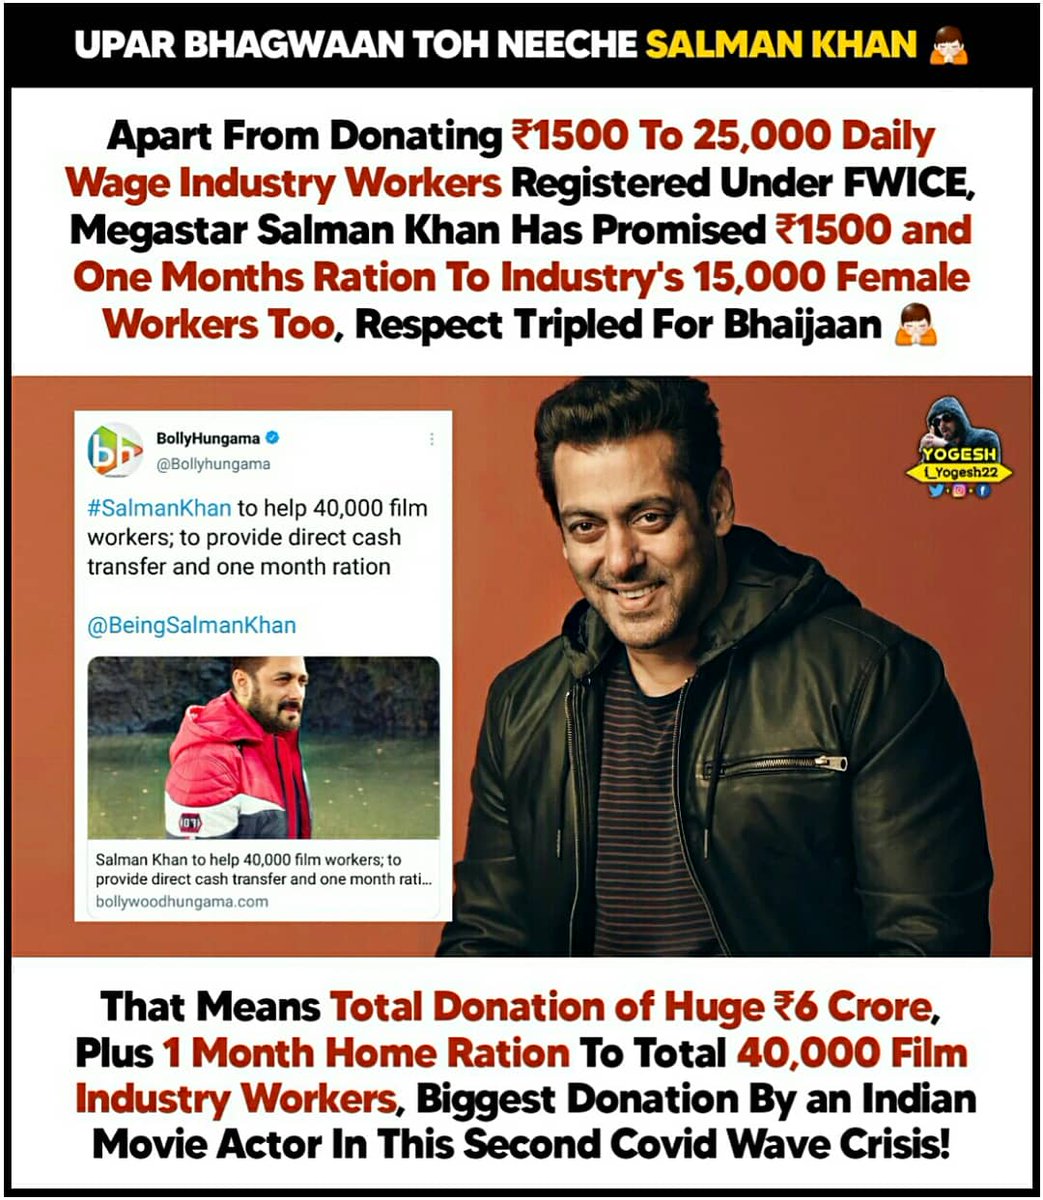 [13]. And Yet Again  #SalmanKhan is Donating ₹1500 To Around 40000 Industry Workers (2500 FWICE Workers + 15000 Women Workers), Total Around 6 Crore For 1 Month![14]. He Has Also Promised 1 Months Ration To All Those 40000 Workers (Worth 20 Cr+) 25 Crore+ In Total (10/n)